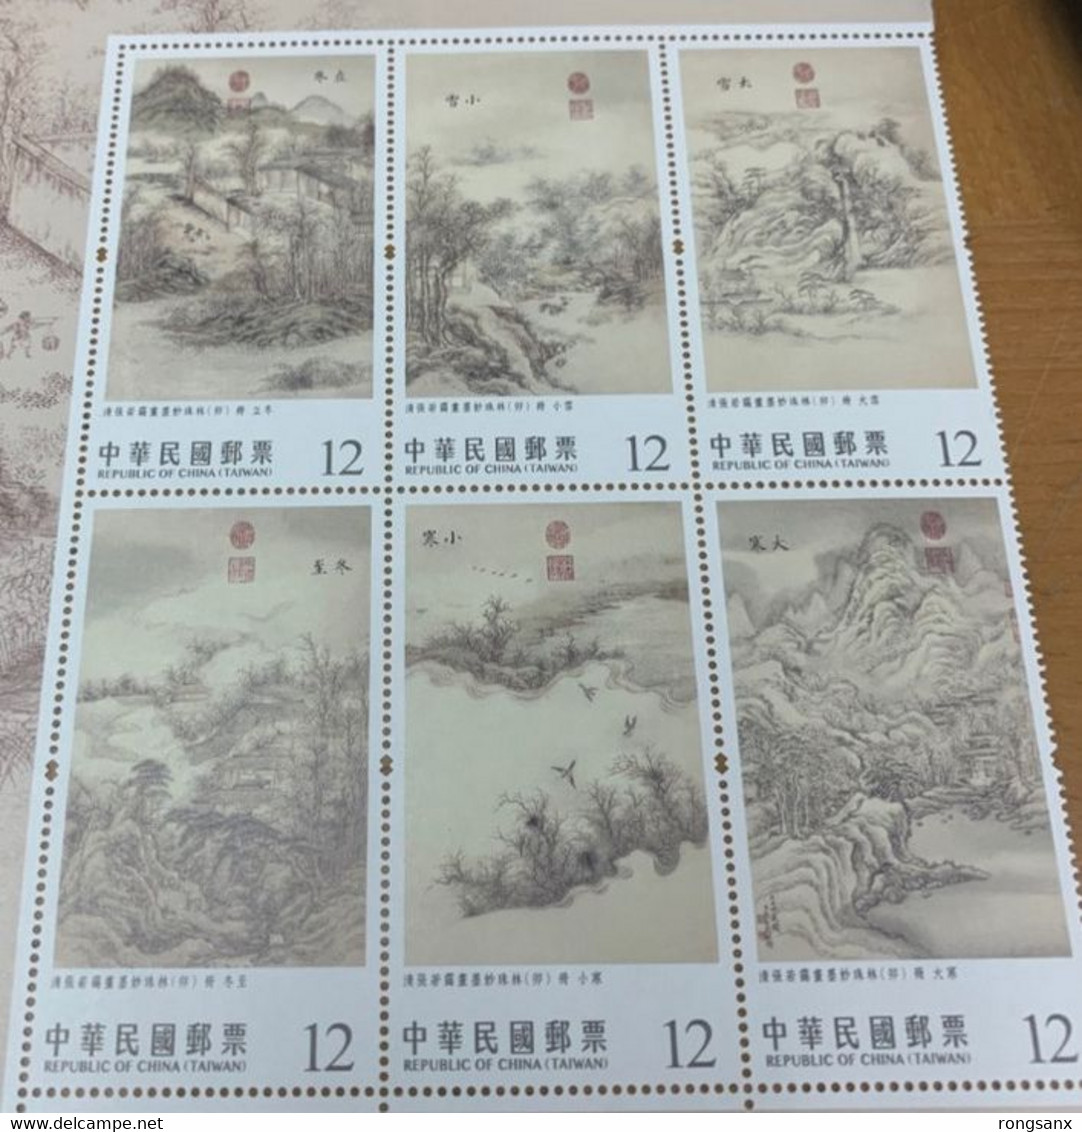 2022 TAIWAN 2022 CHINESE PAINTINGS 24 SOLAR TERMS (WINTER) BLK 6V STAMP - Covers & Documents